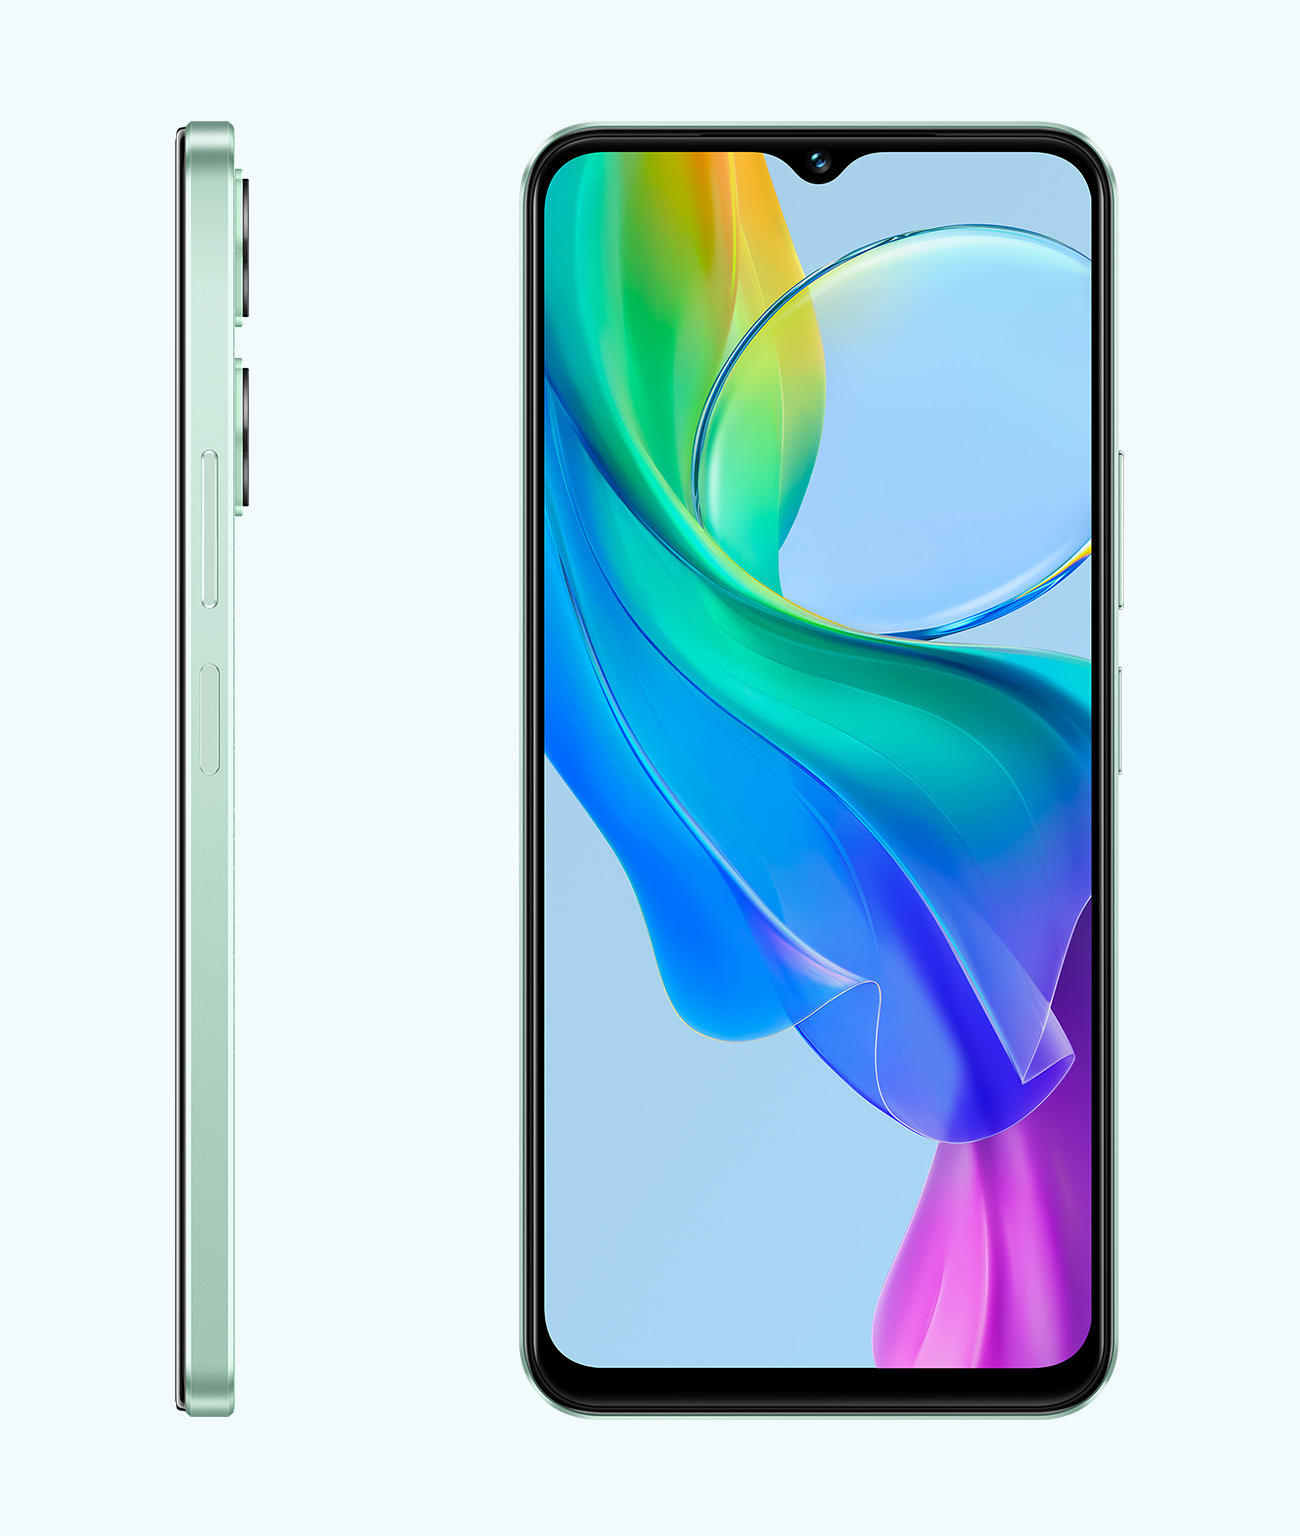 Entry-level vivo Y18 debuts in India with "segment's brightest screen", IP54 rating